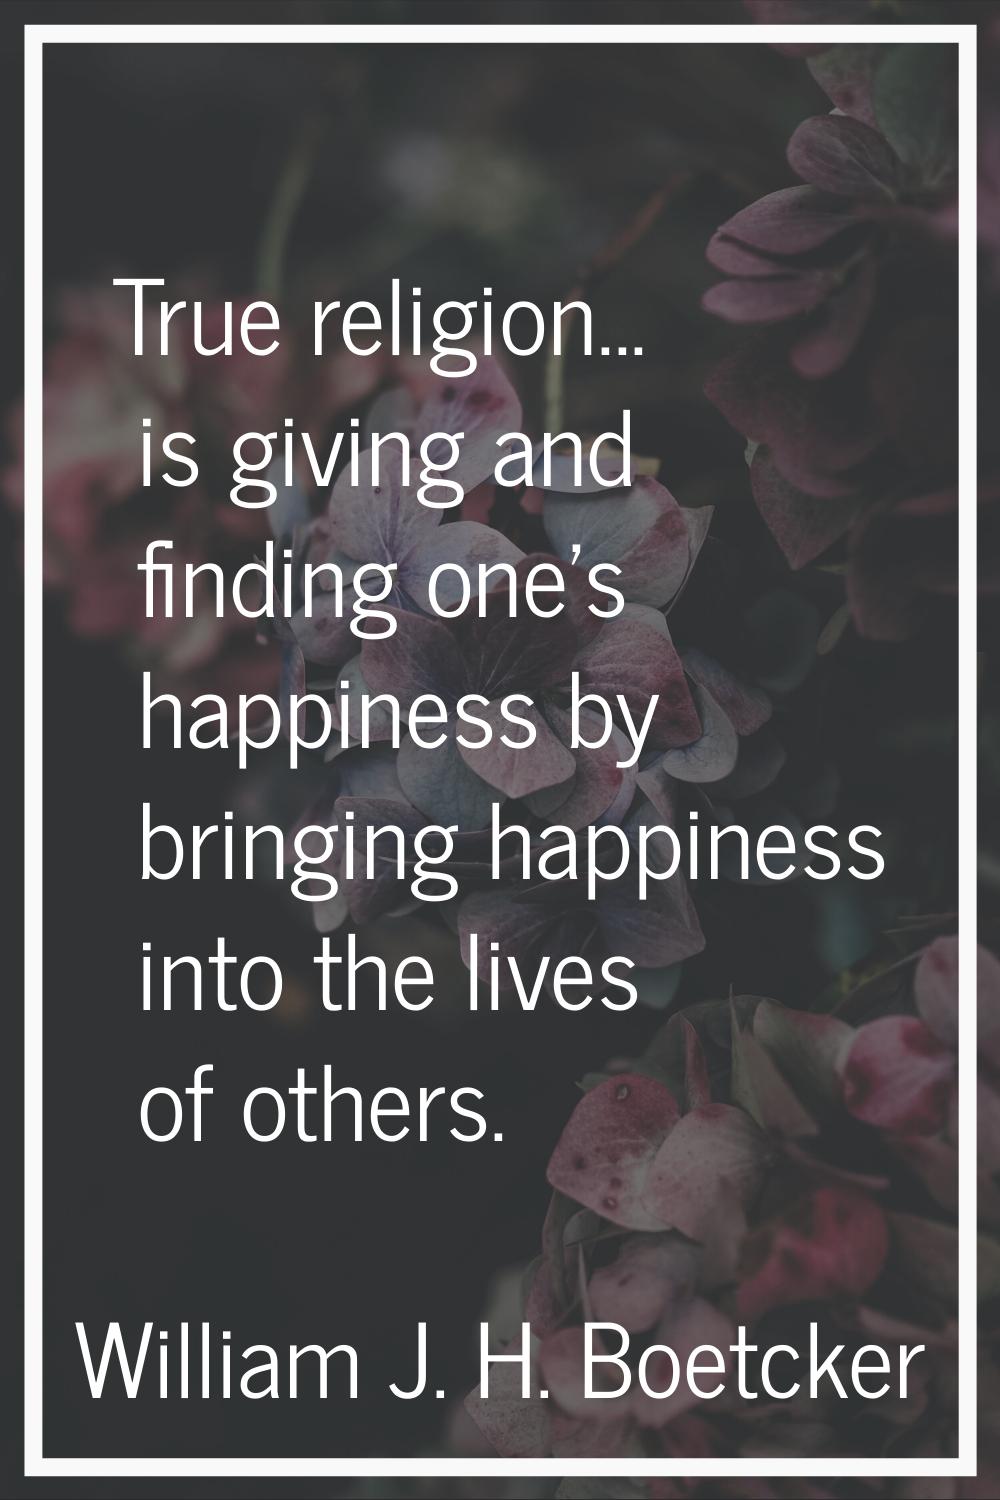 True religion... is giving and finding one's happiness by bringing happiness into the lives of othe